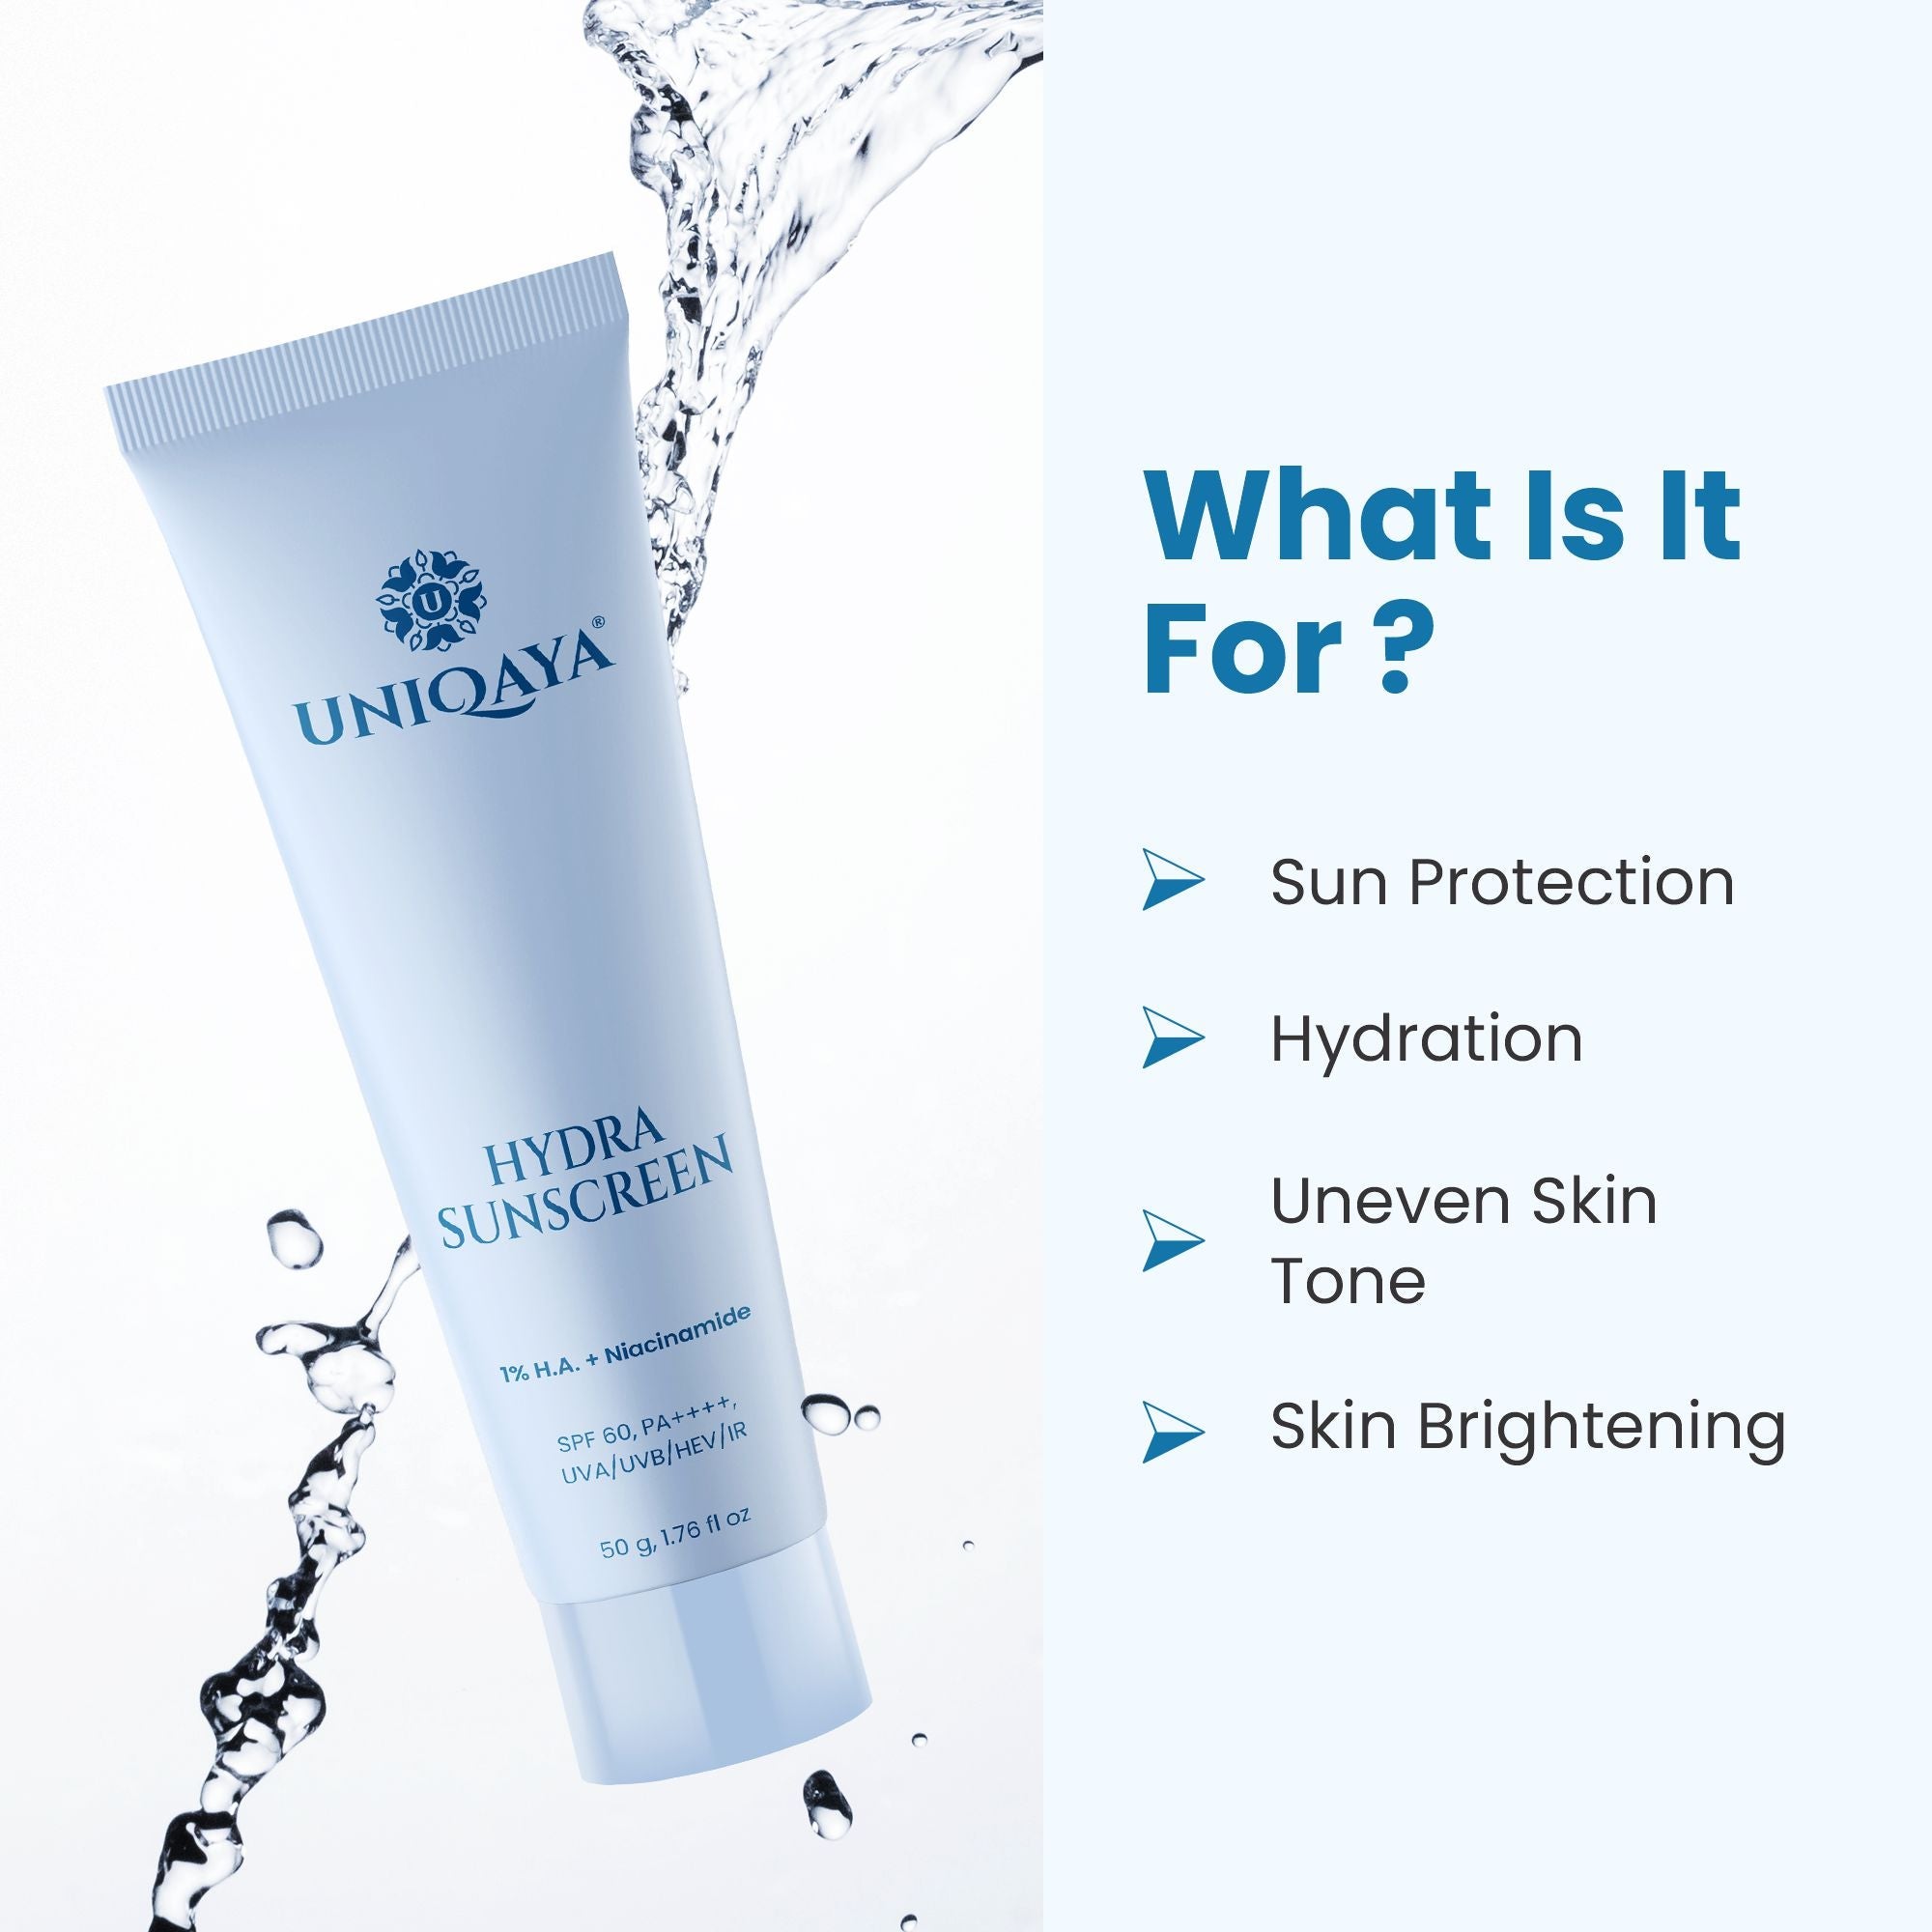 Uniqaya Hydra Sunscreen What is it For?